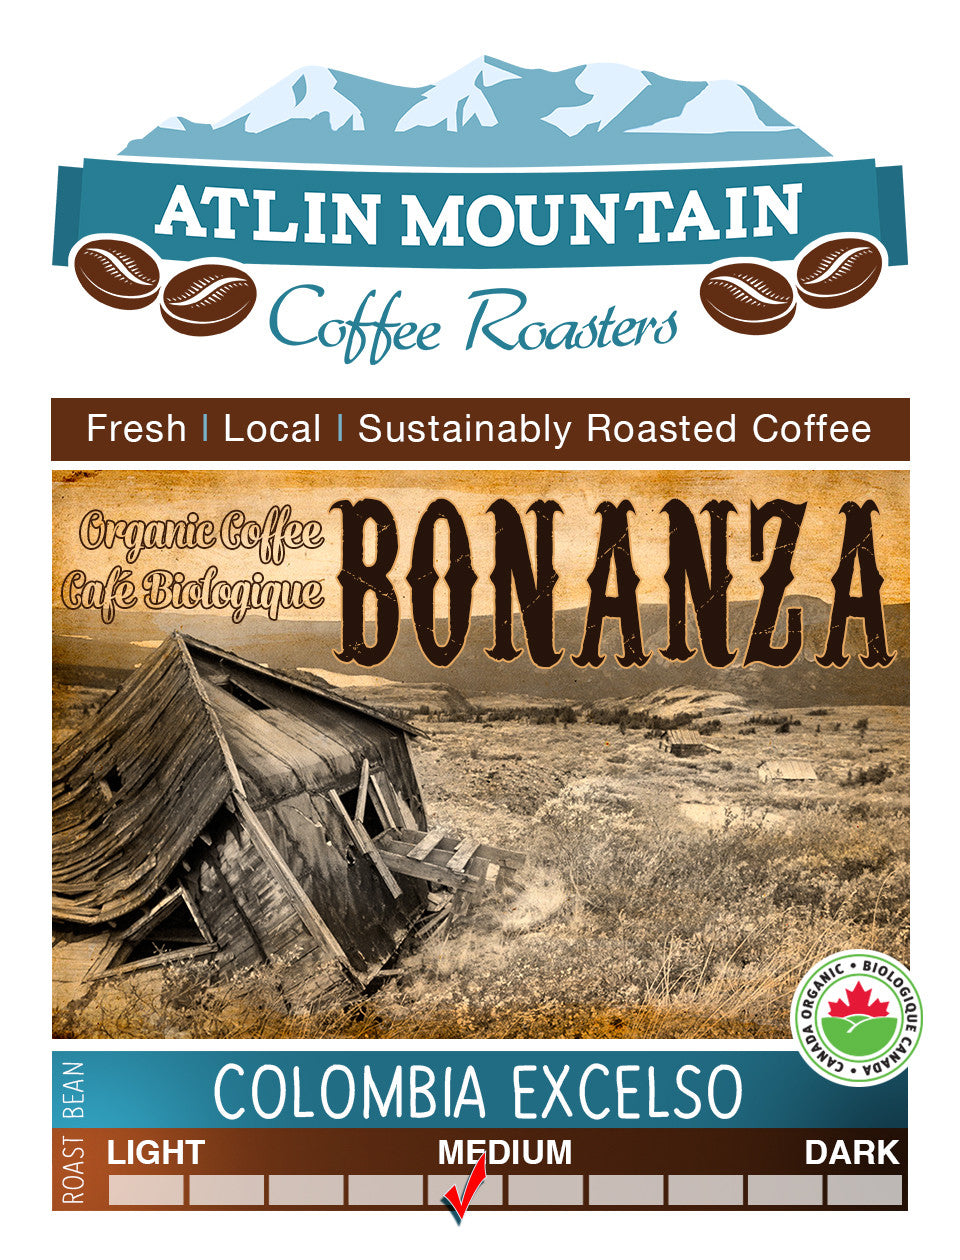 About the origin of our Colombia Excelso (Bonanza).